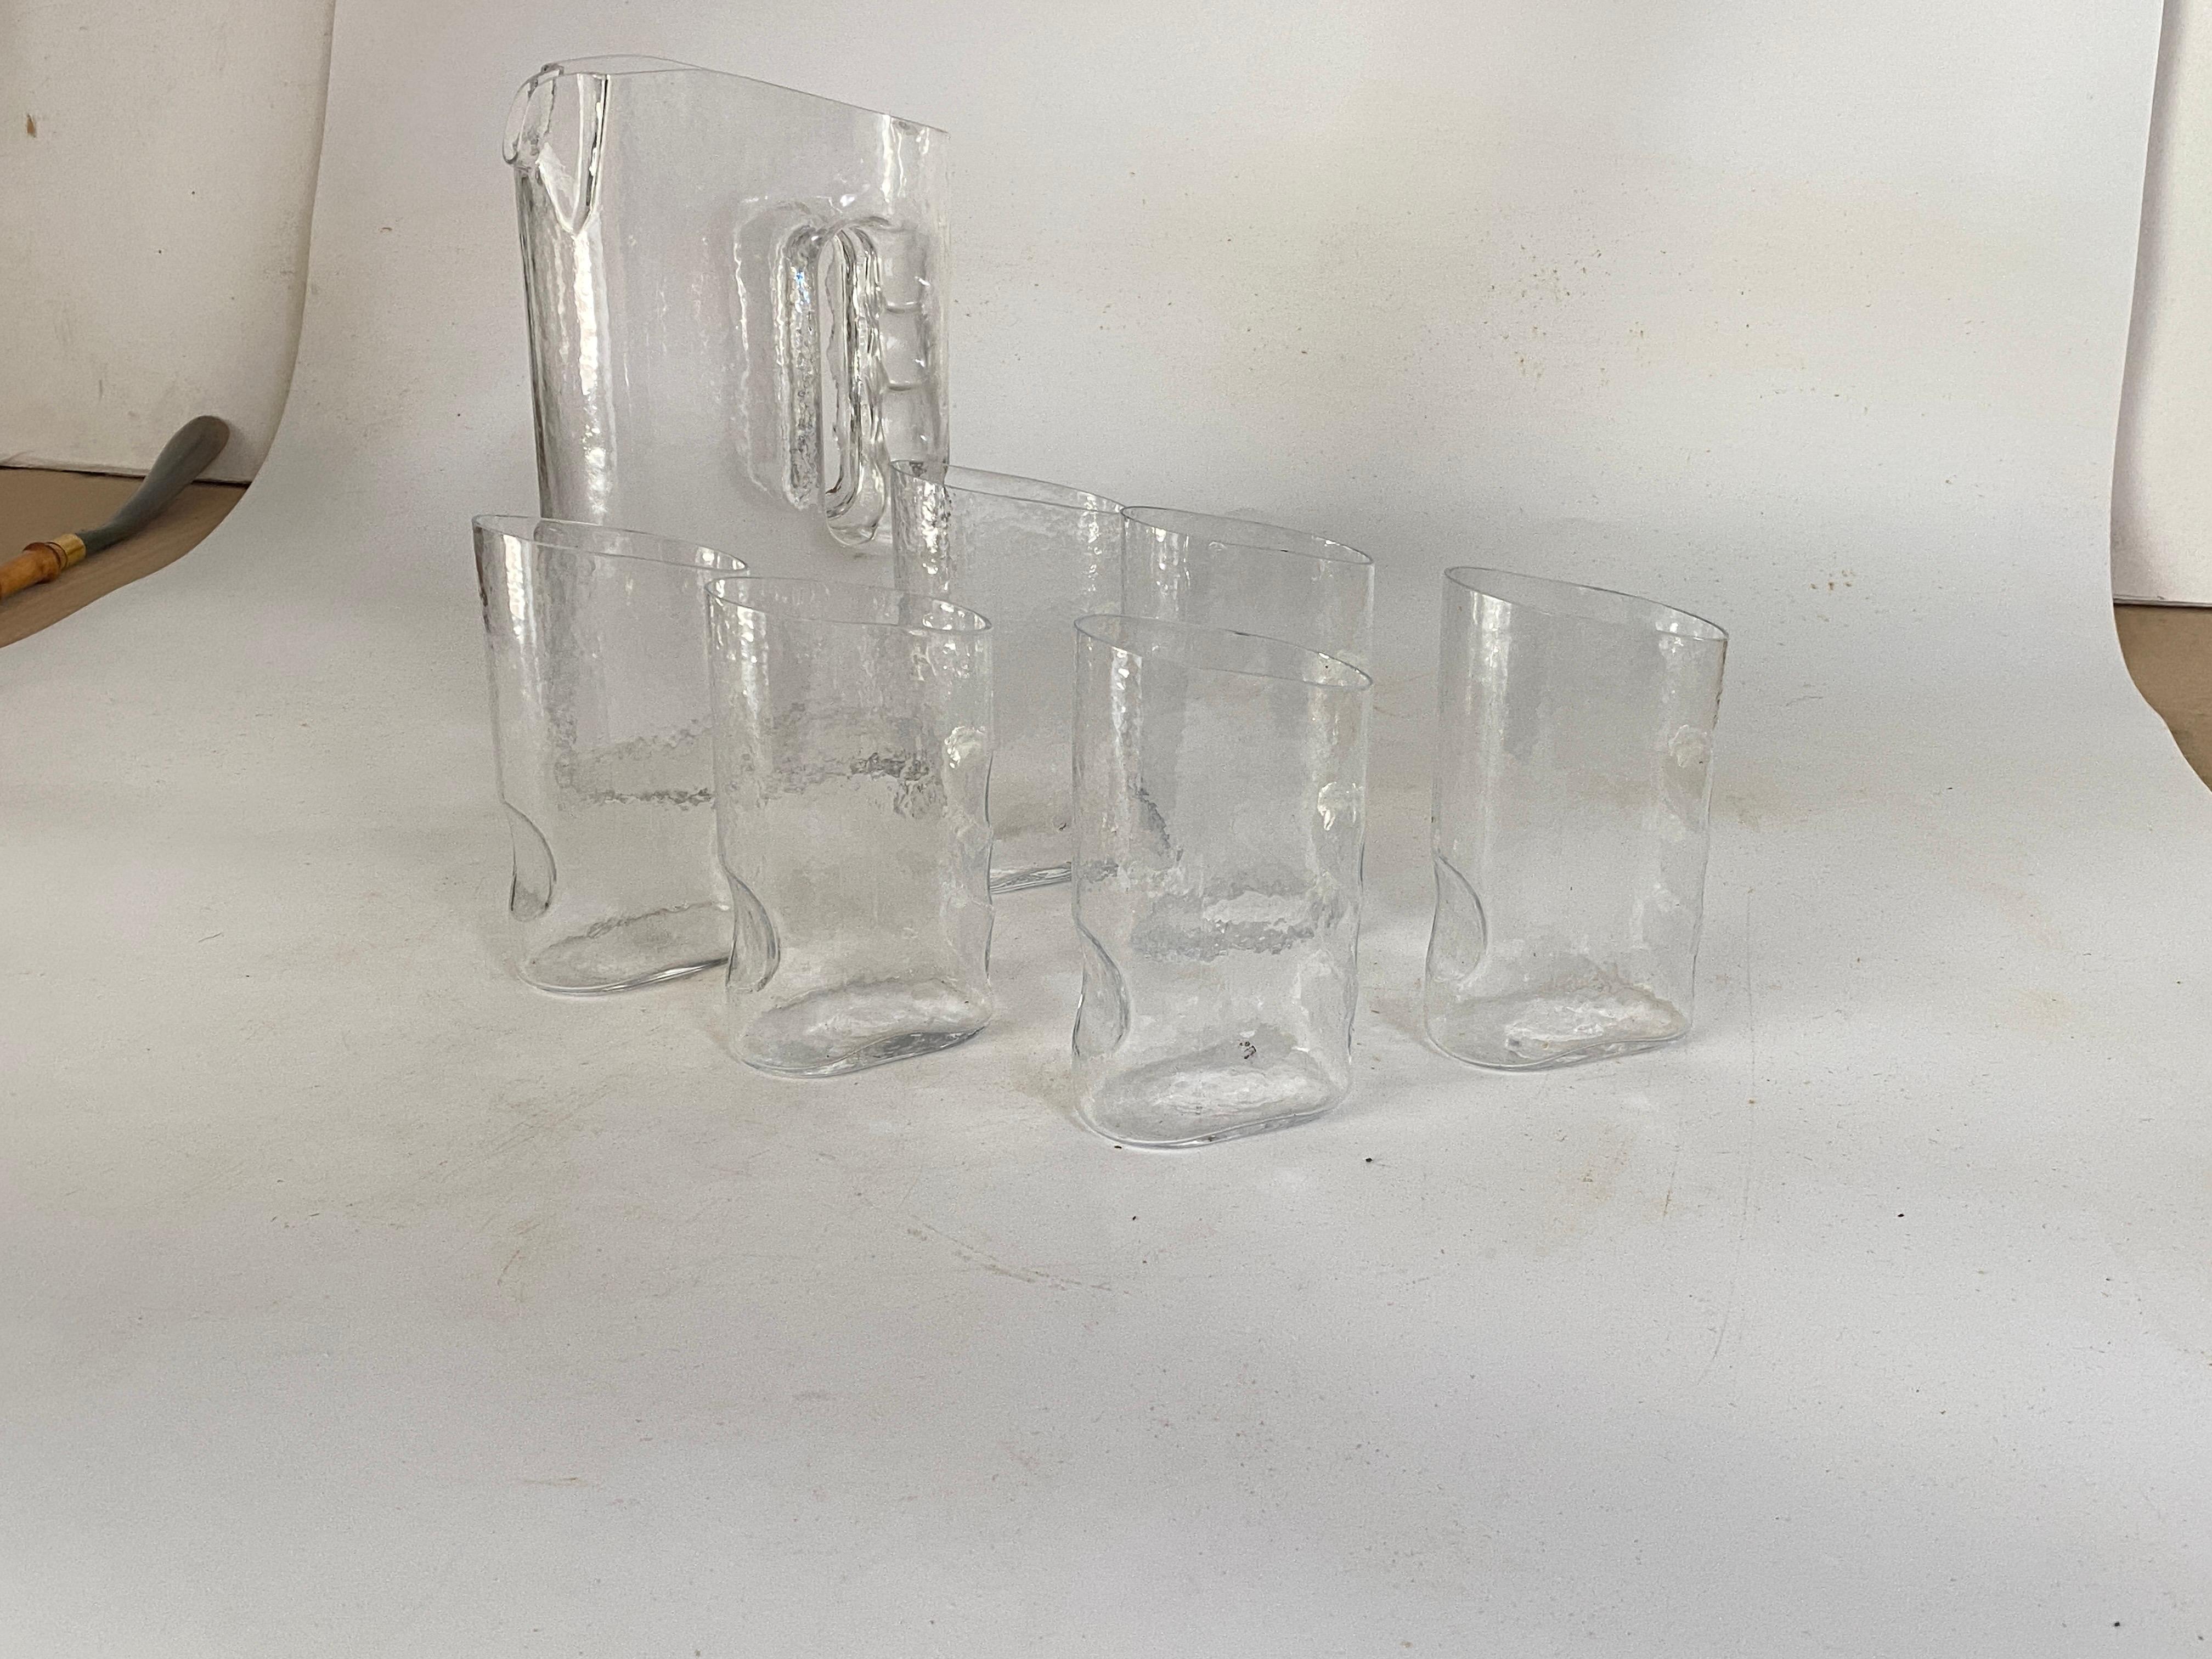 Set of 6 Rare modernist sixties glasses from the “Drink In” glass service and a Pitcher designed in 1969 by Claus Josef Riedel for the Riedel Glass factory in Kufstein Tirol Austria. Mint condition”